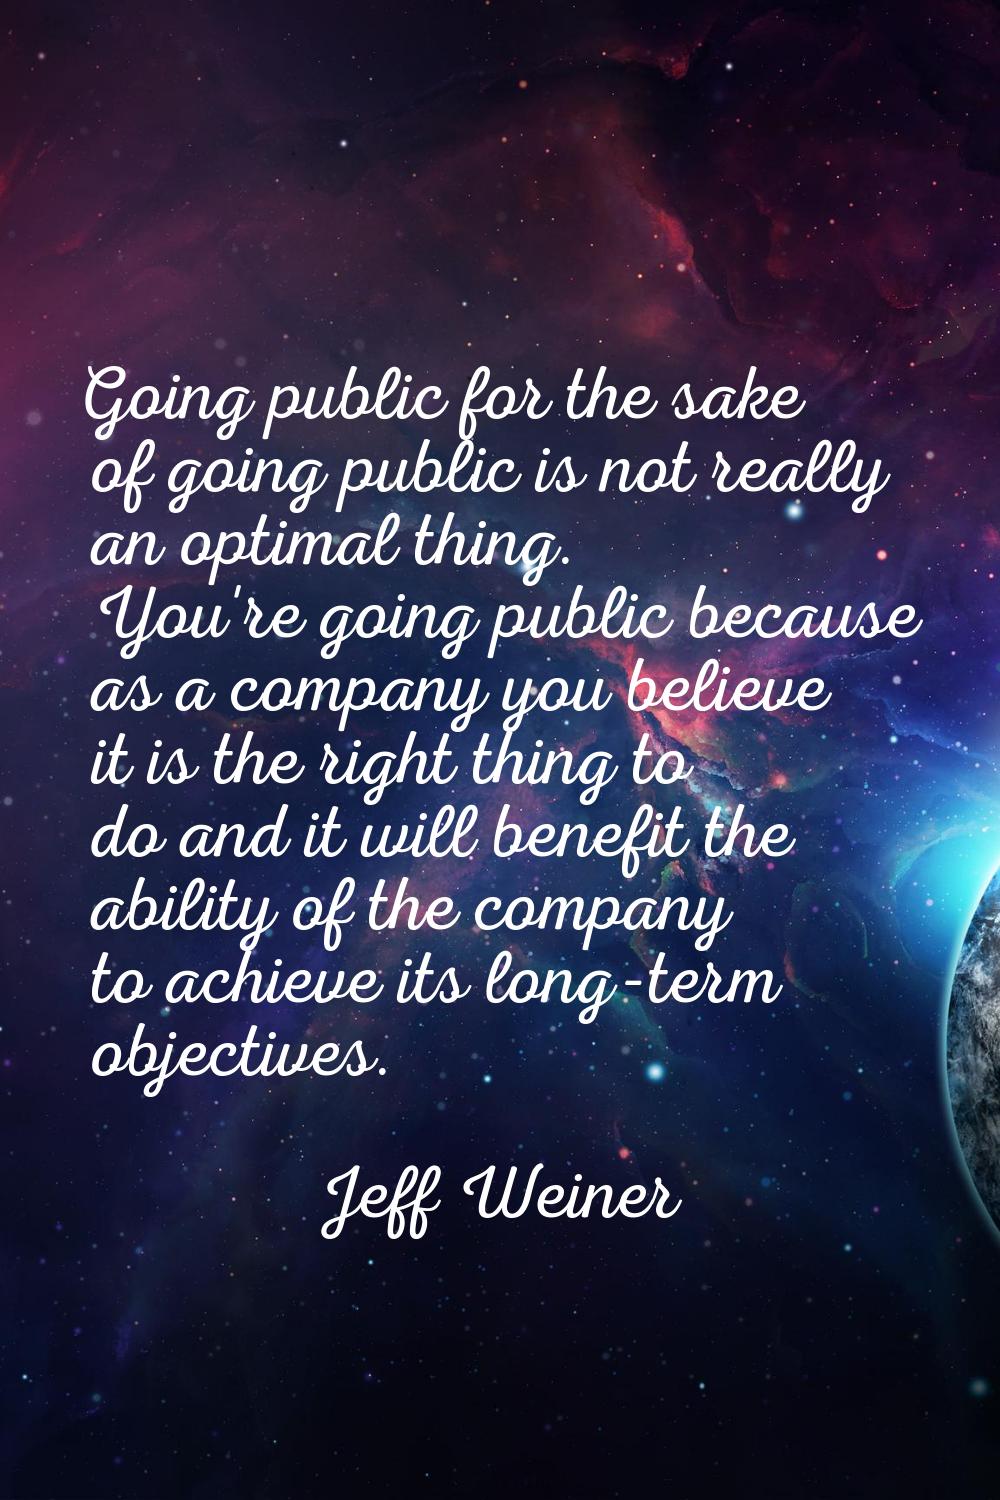 Going public for the sake of going public is not really an optimal thing. You're going public becau